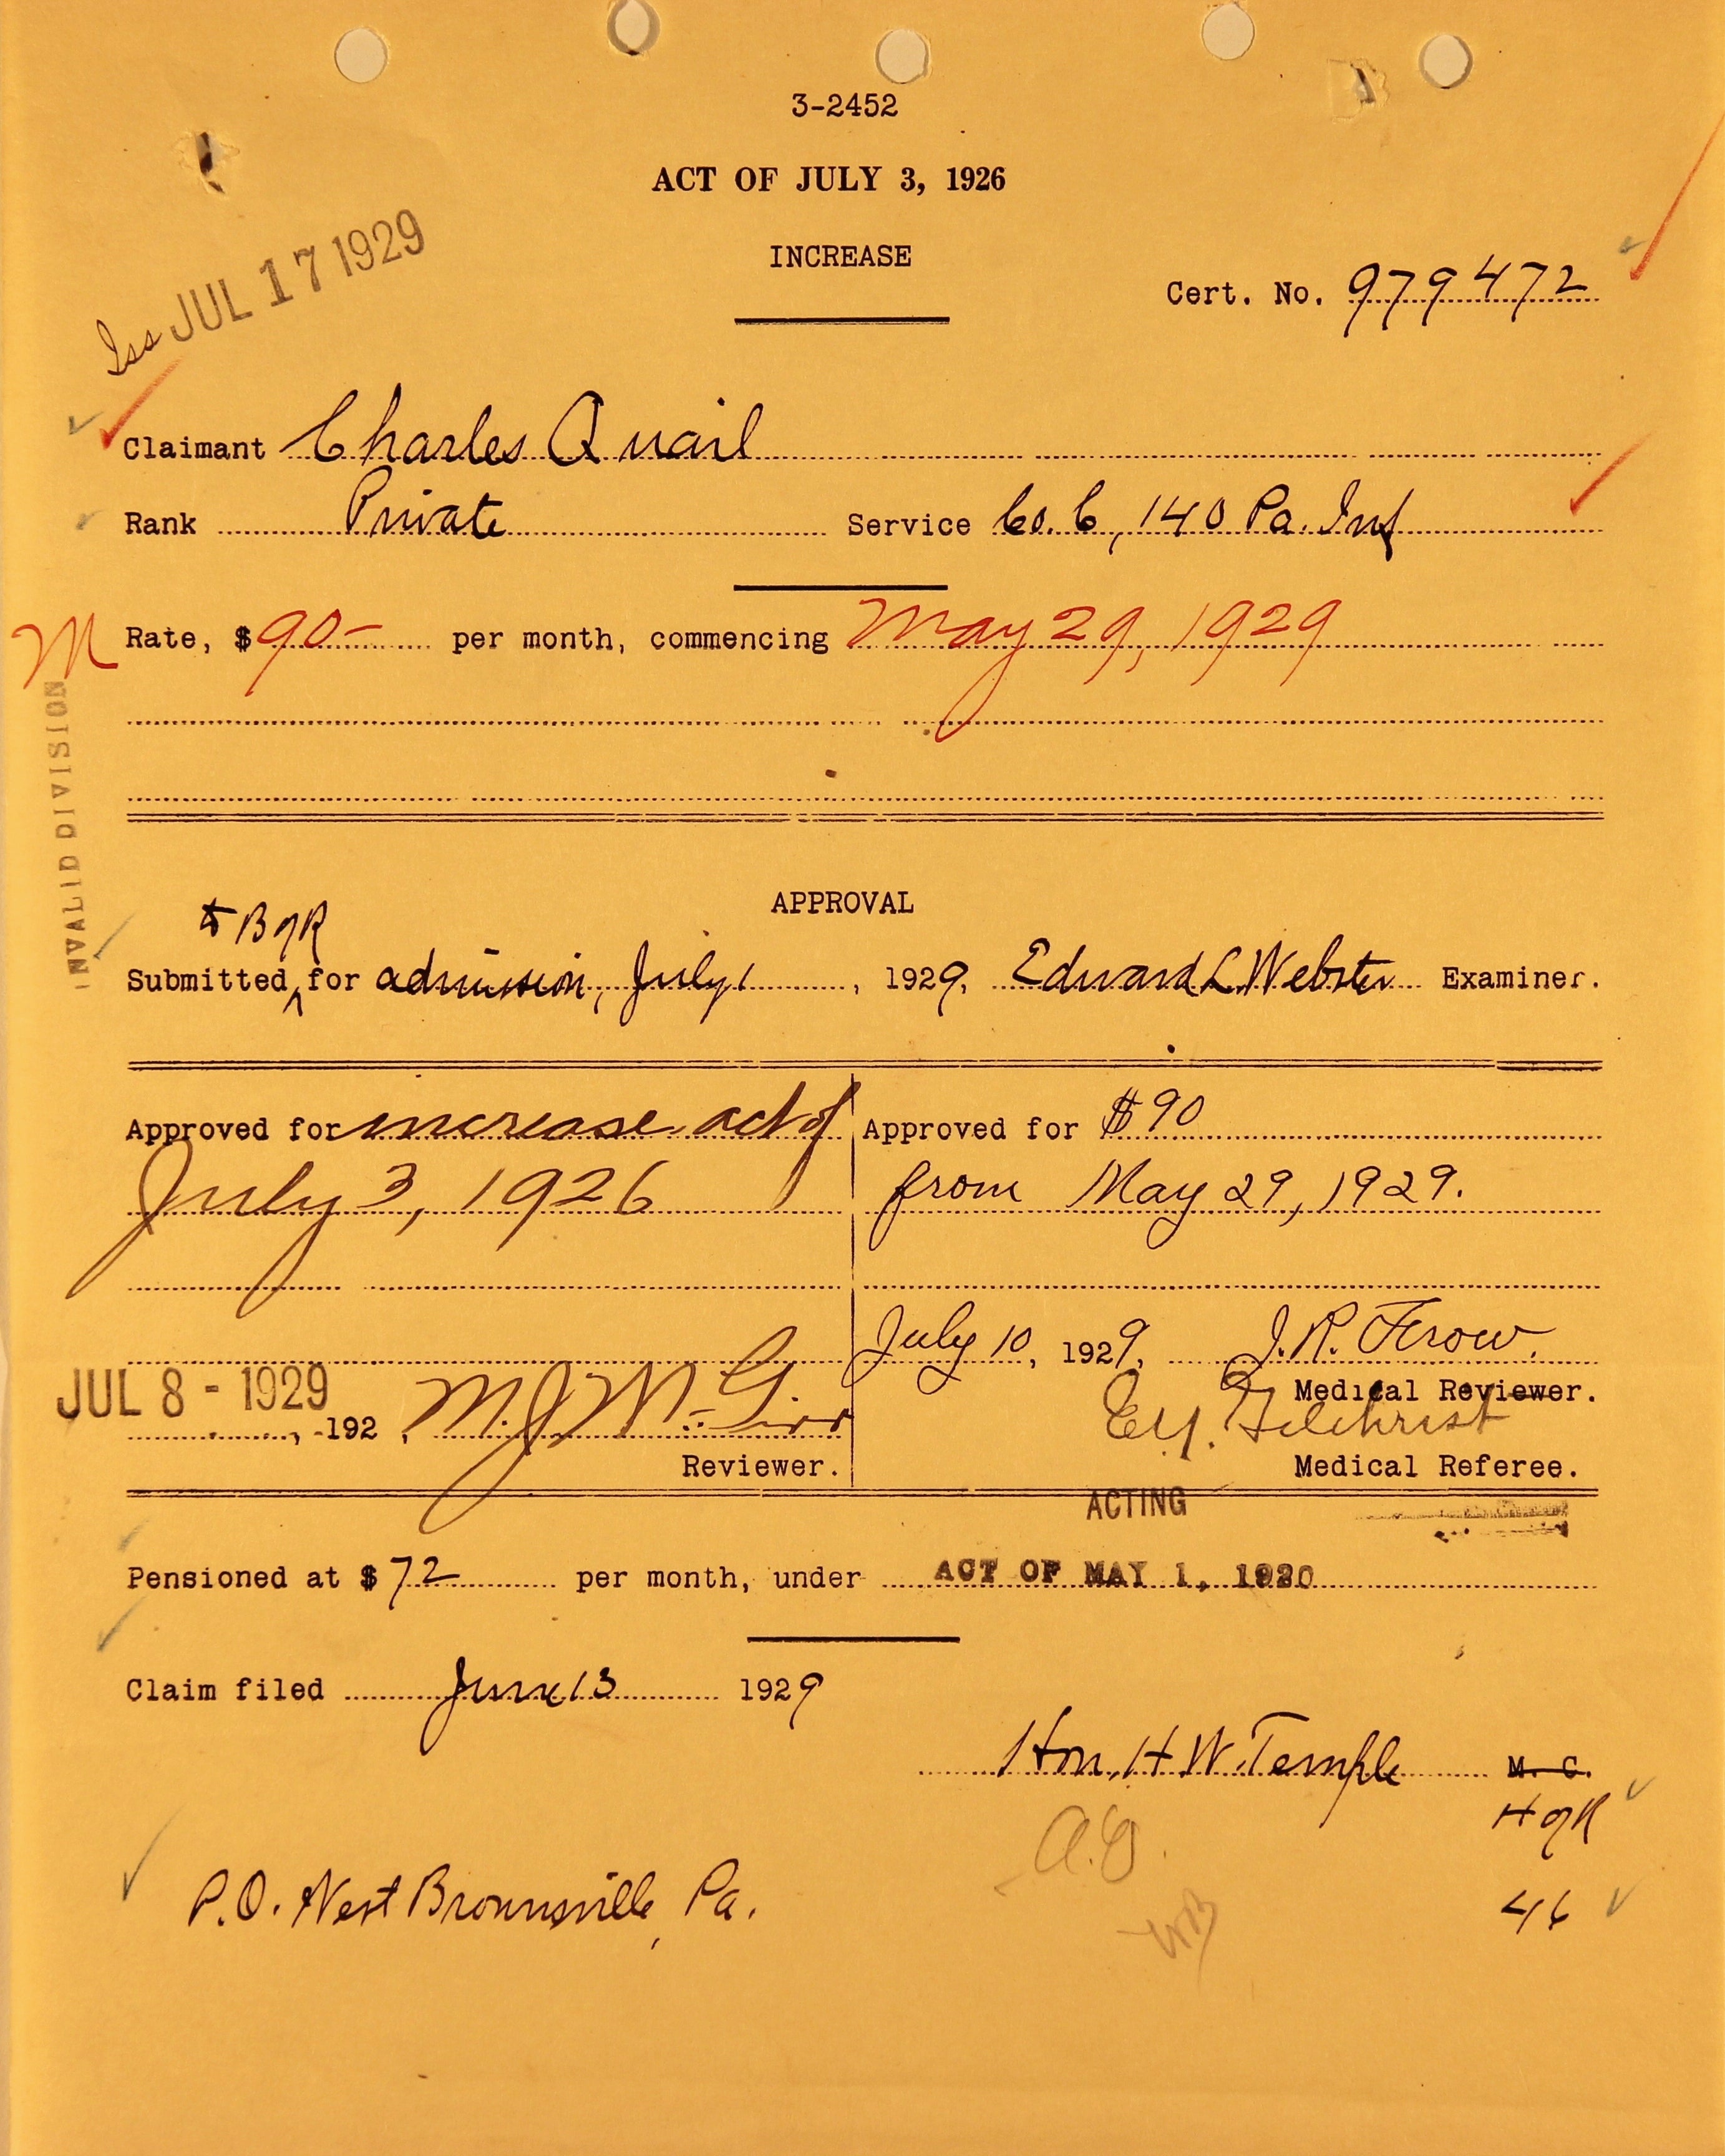 A ruling on a recruit's pension under the act of July 3, 1926